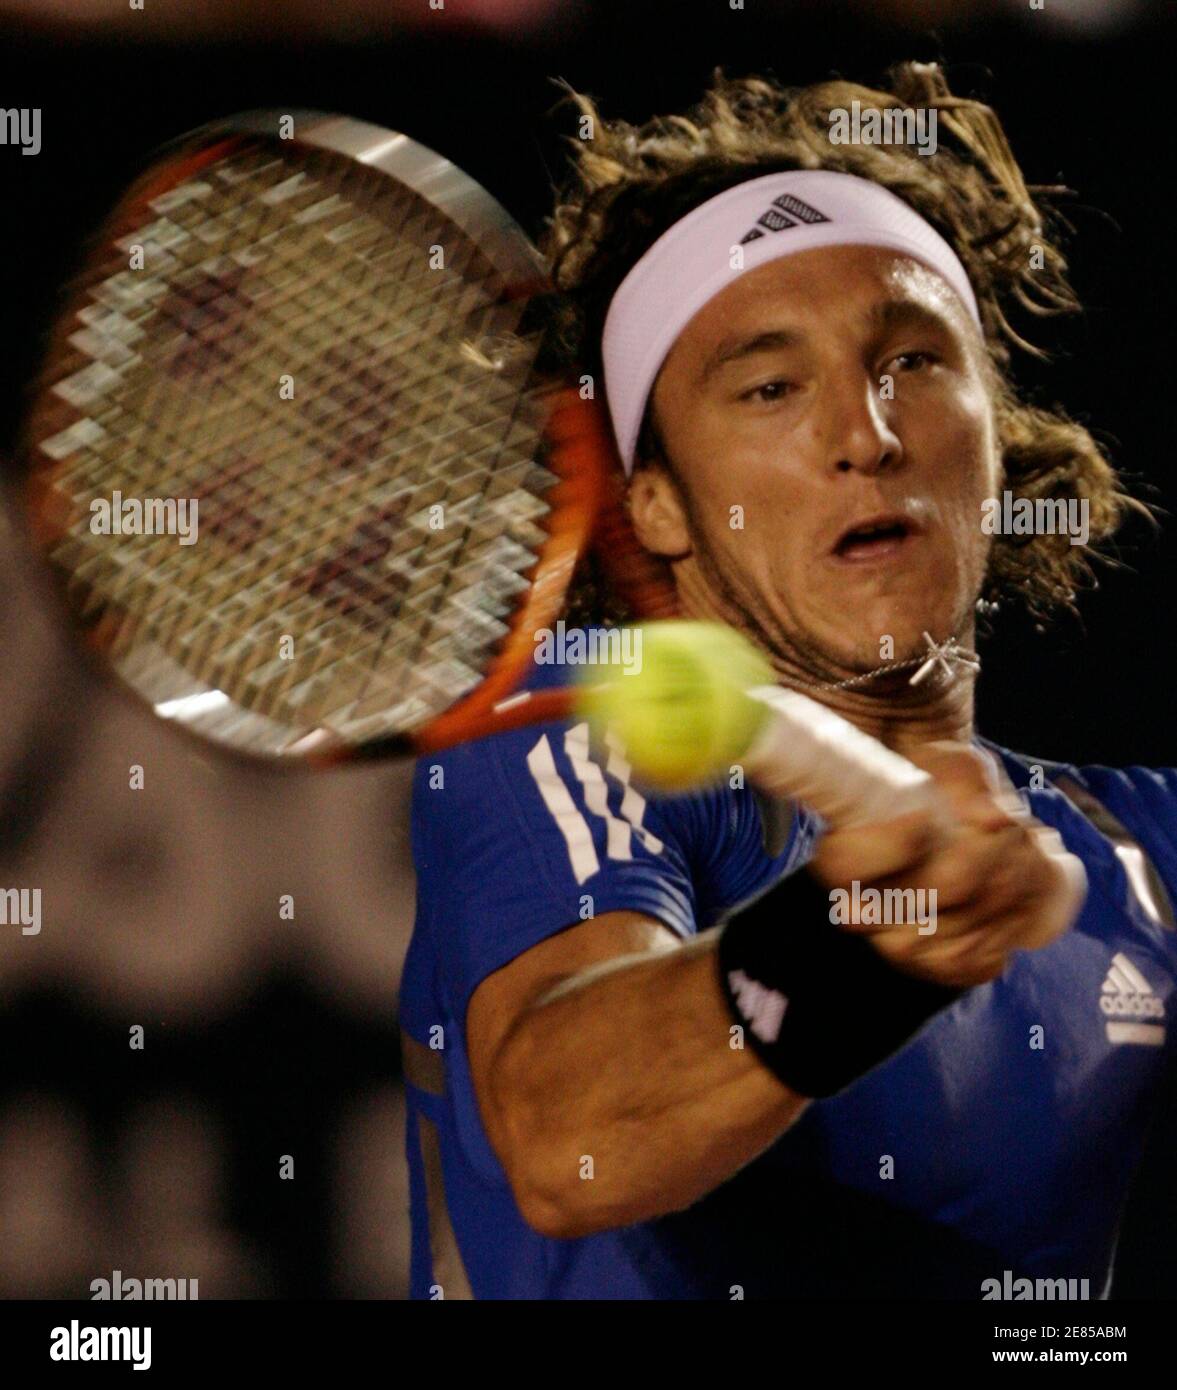 Argentina's Juan Monaco returns the ball to compatriot Juan Pablo Brzezicki during their match at the Mexican Open tennis tournament in Acapulco February 25, 2008. REUTERS/Daniel Aguilar (MEXICO) Stock Photo